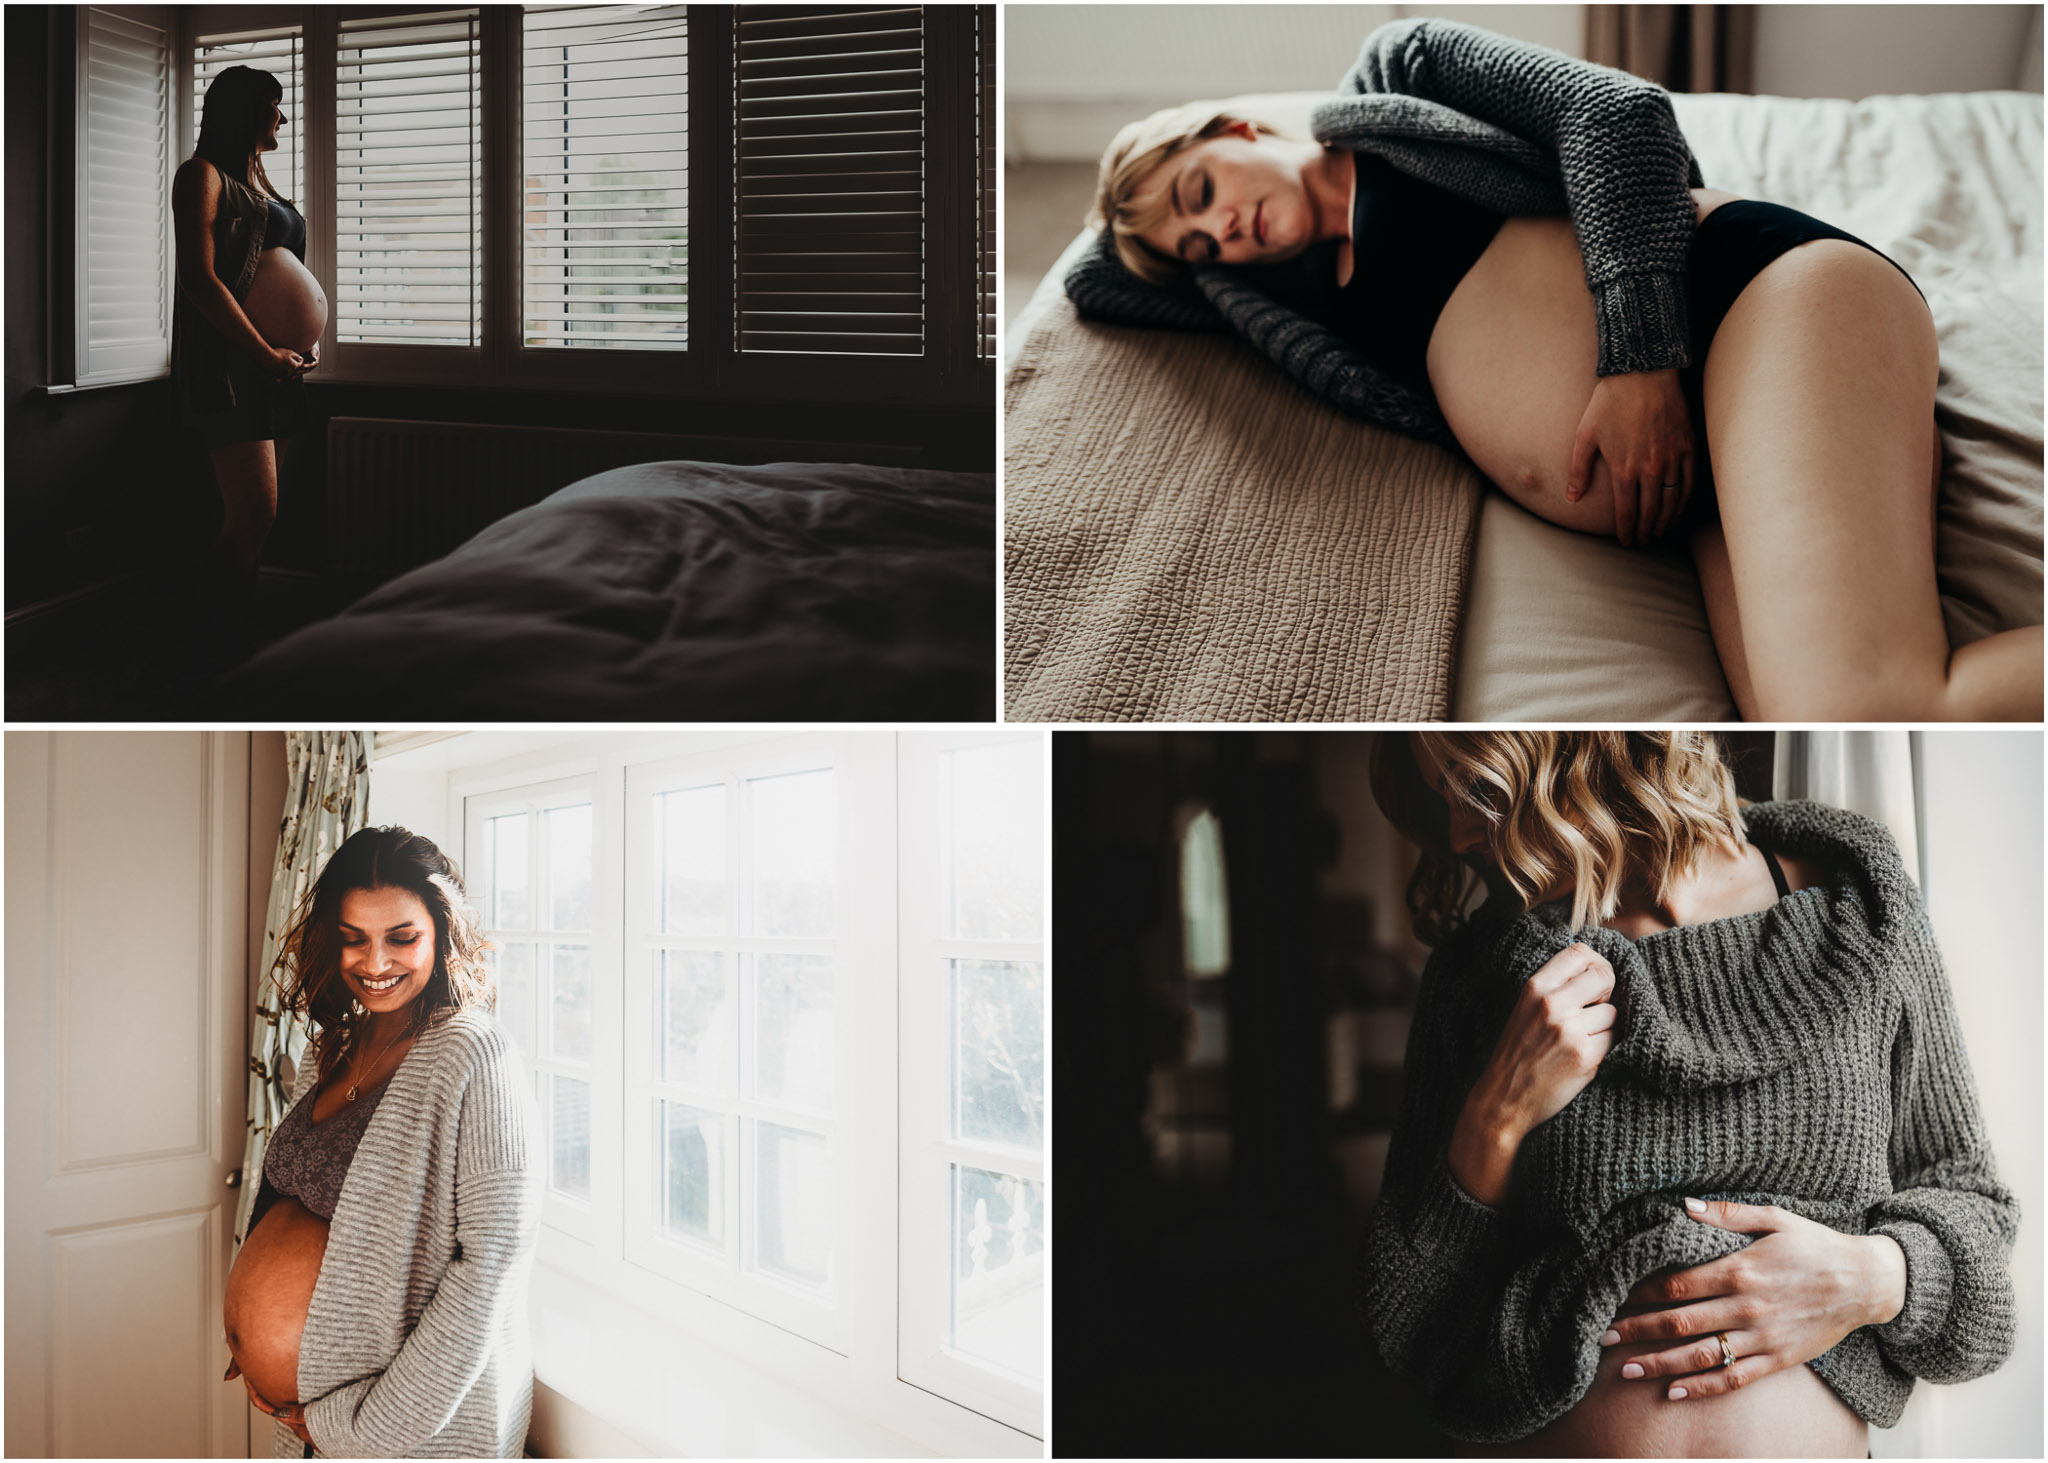 Pregnancy photography showing the beauty in mothers-to-be.